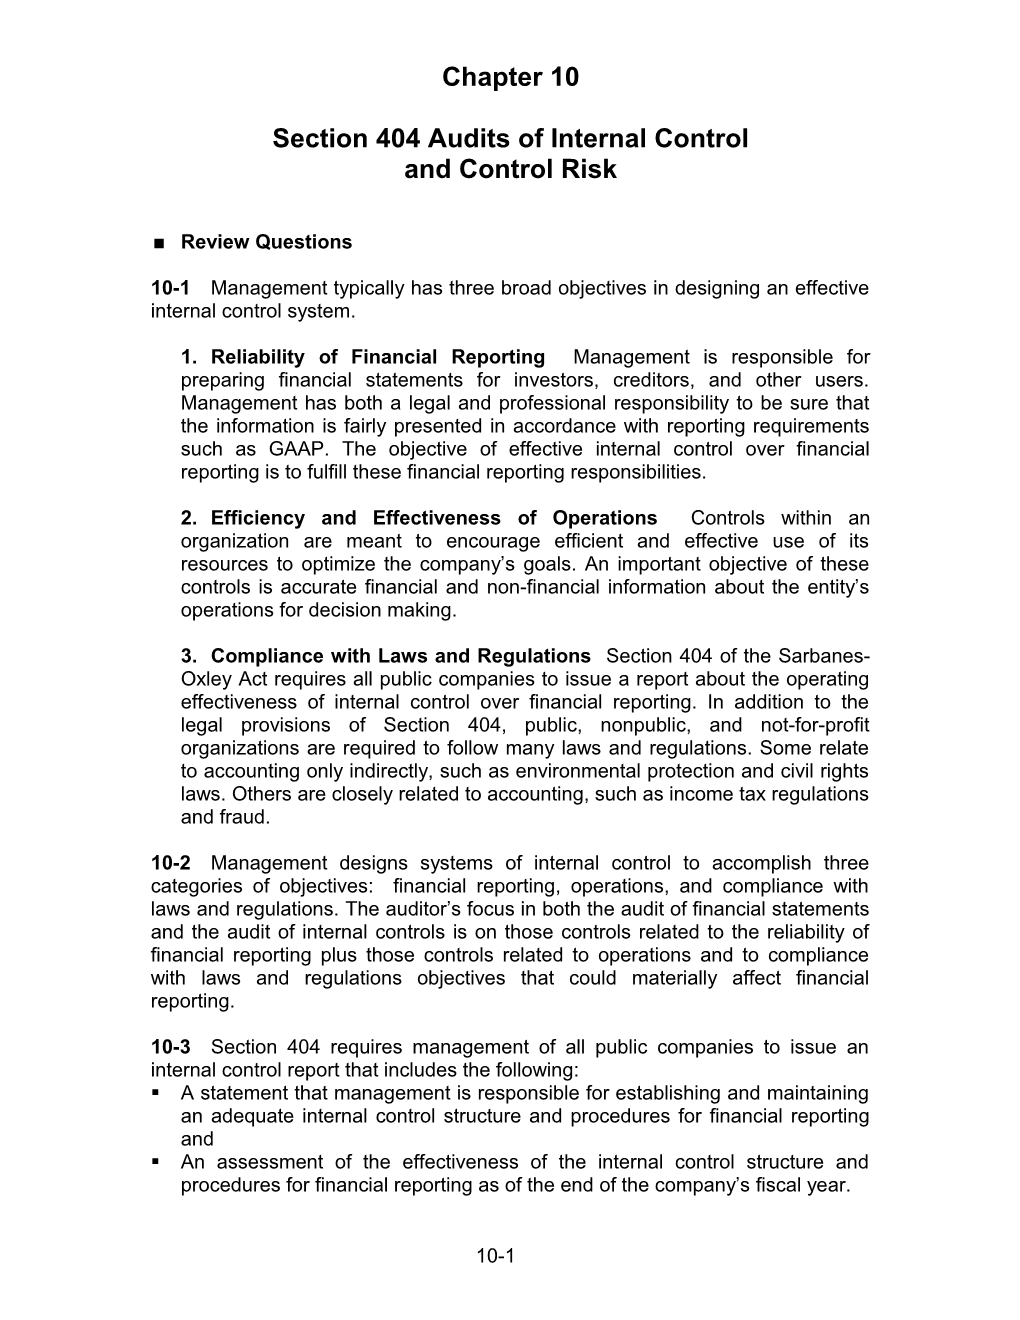 Section 404 Audits of Internal Control